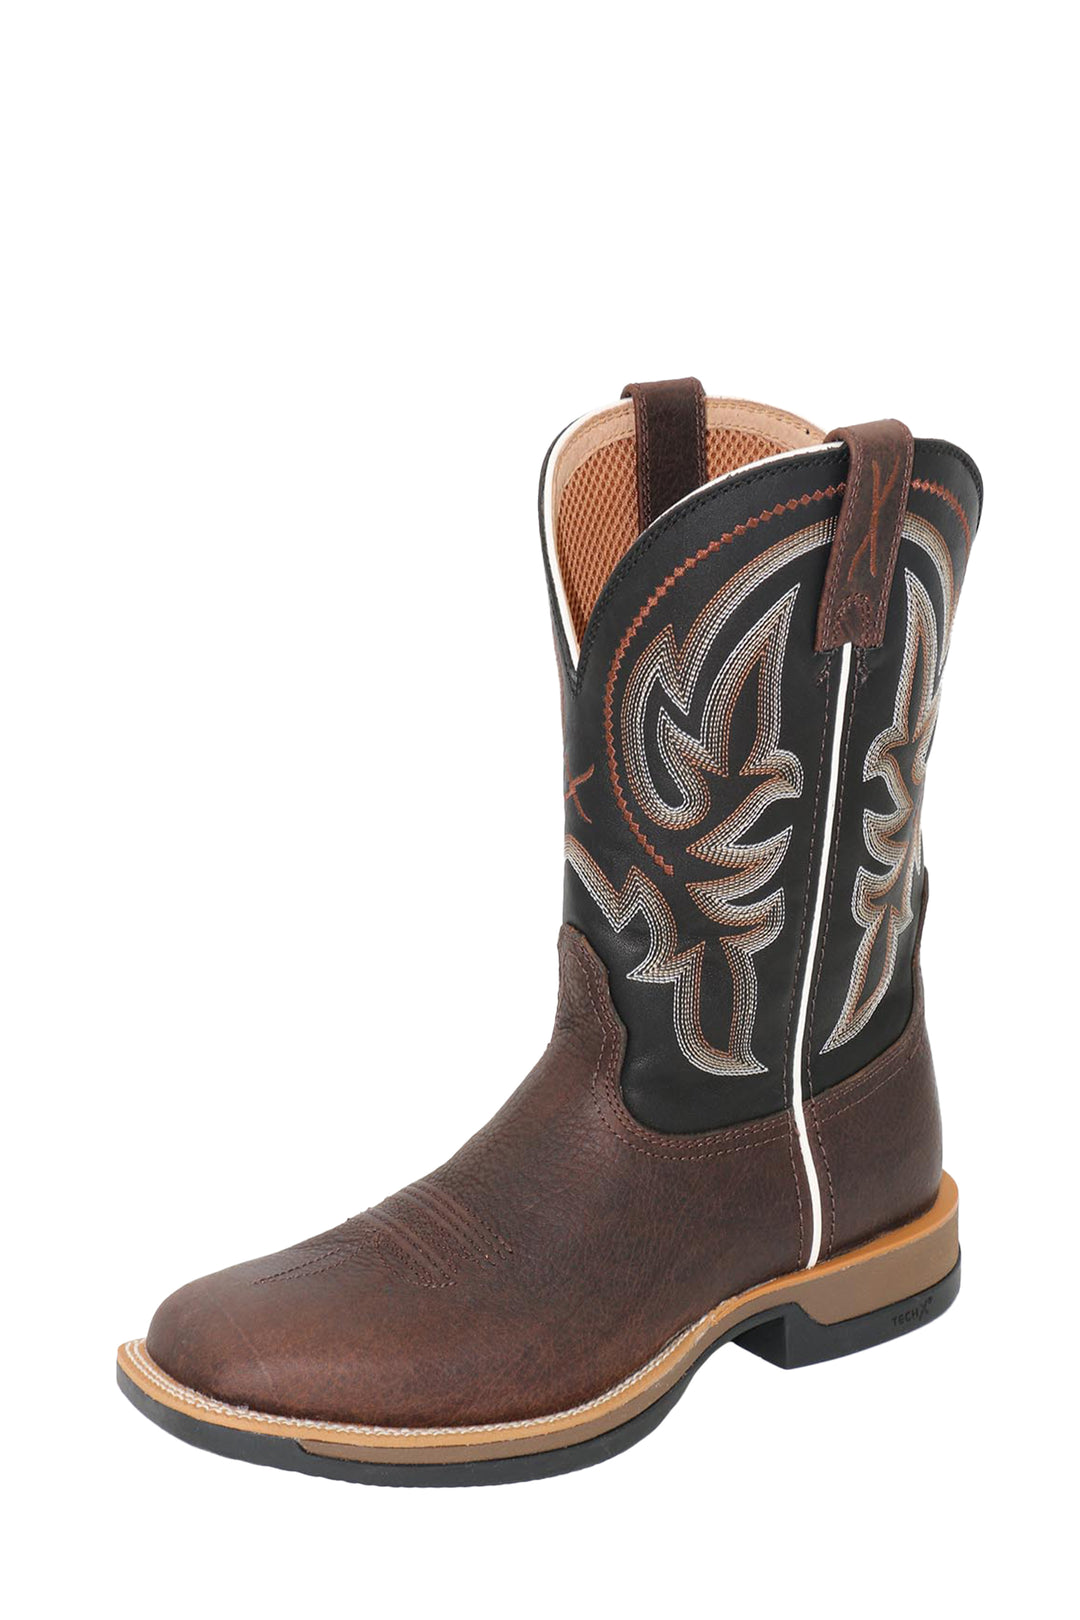 Twisted X - Mens 11 Tech X1 Chocolate Boot